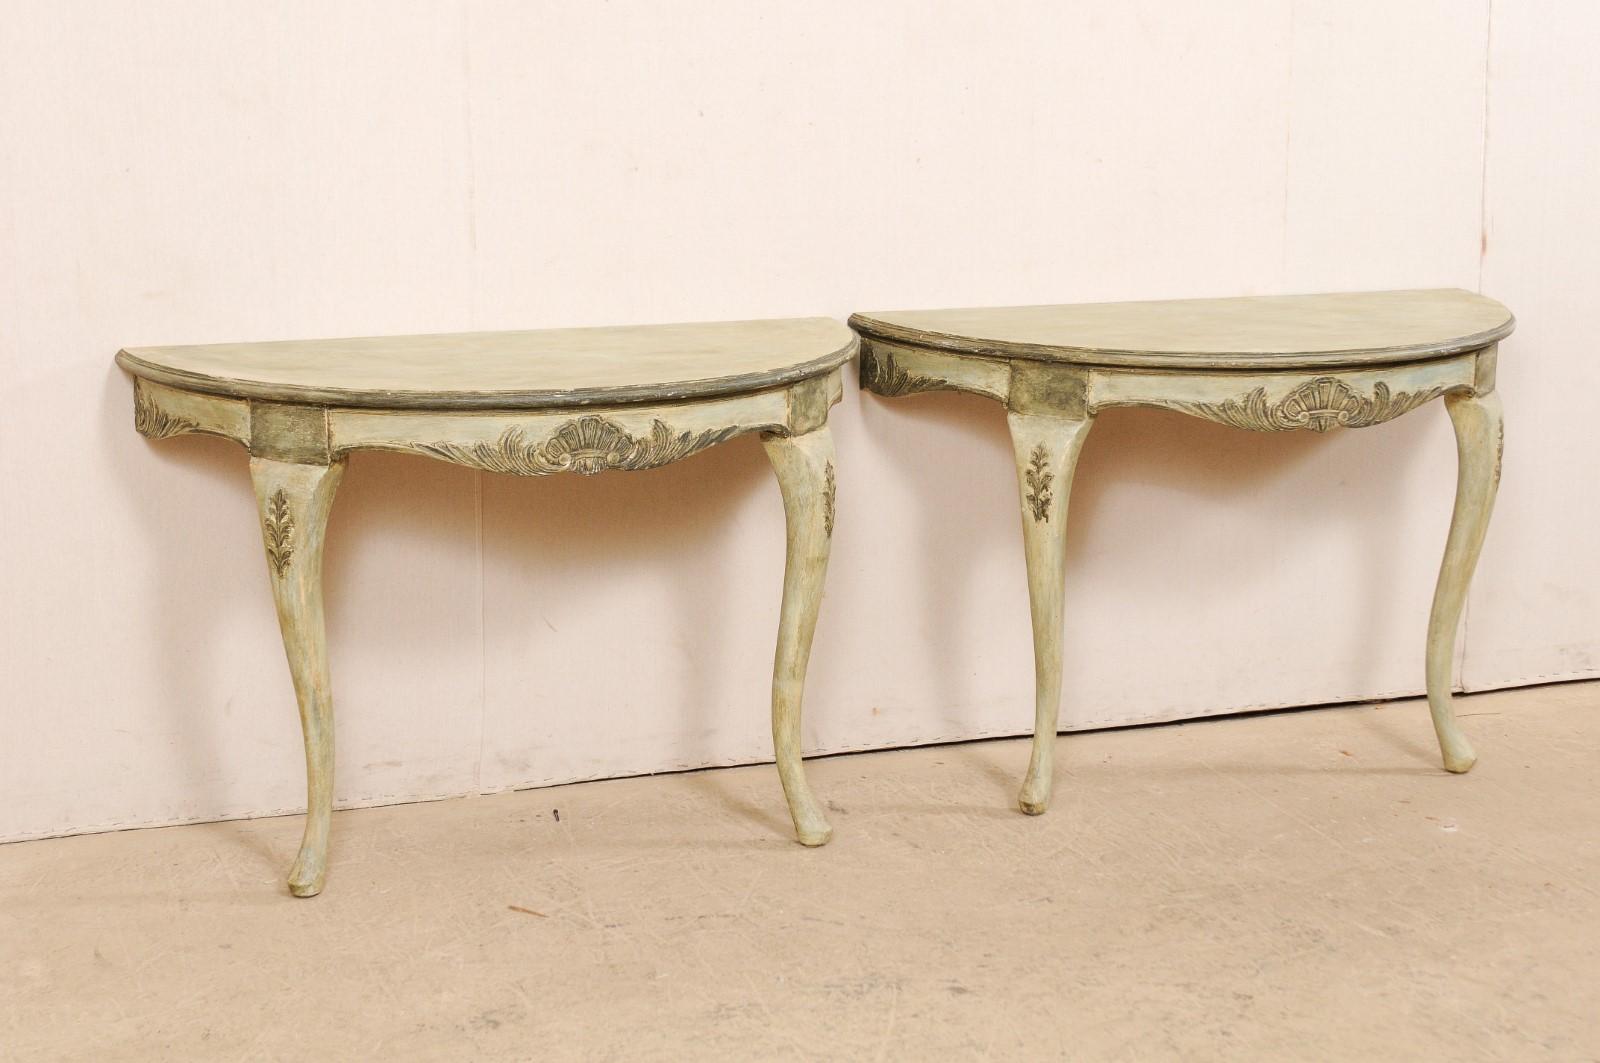 Swedish Pair of Wall-Mounted Demilune Tables with Carved Shell & Foliage Accents For Sale 2